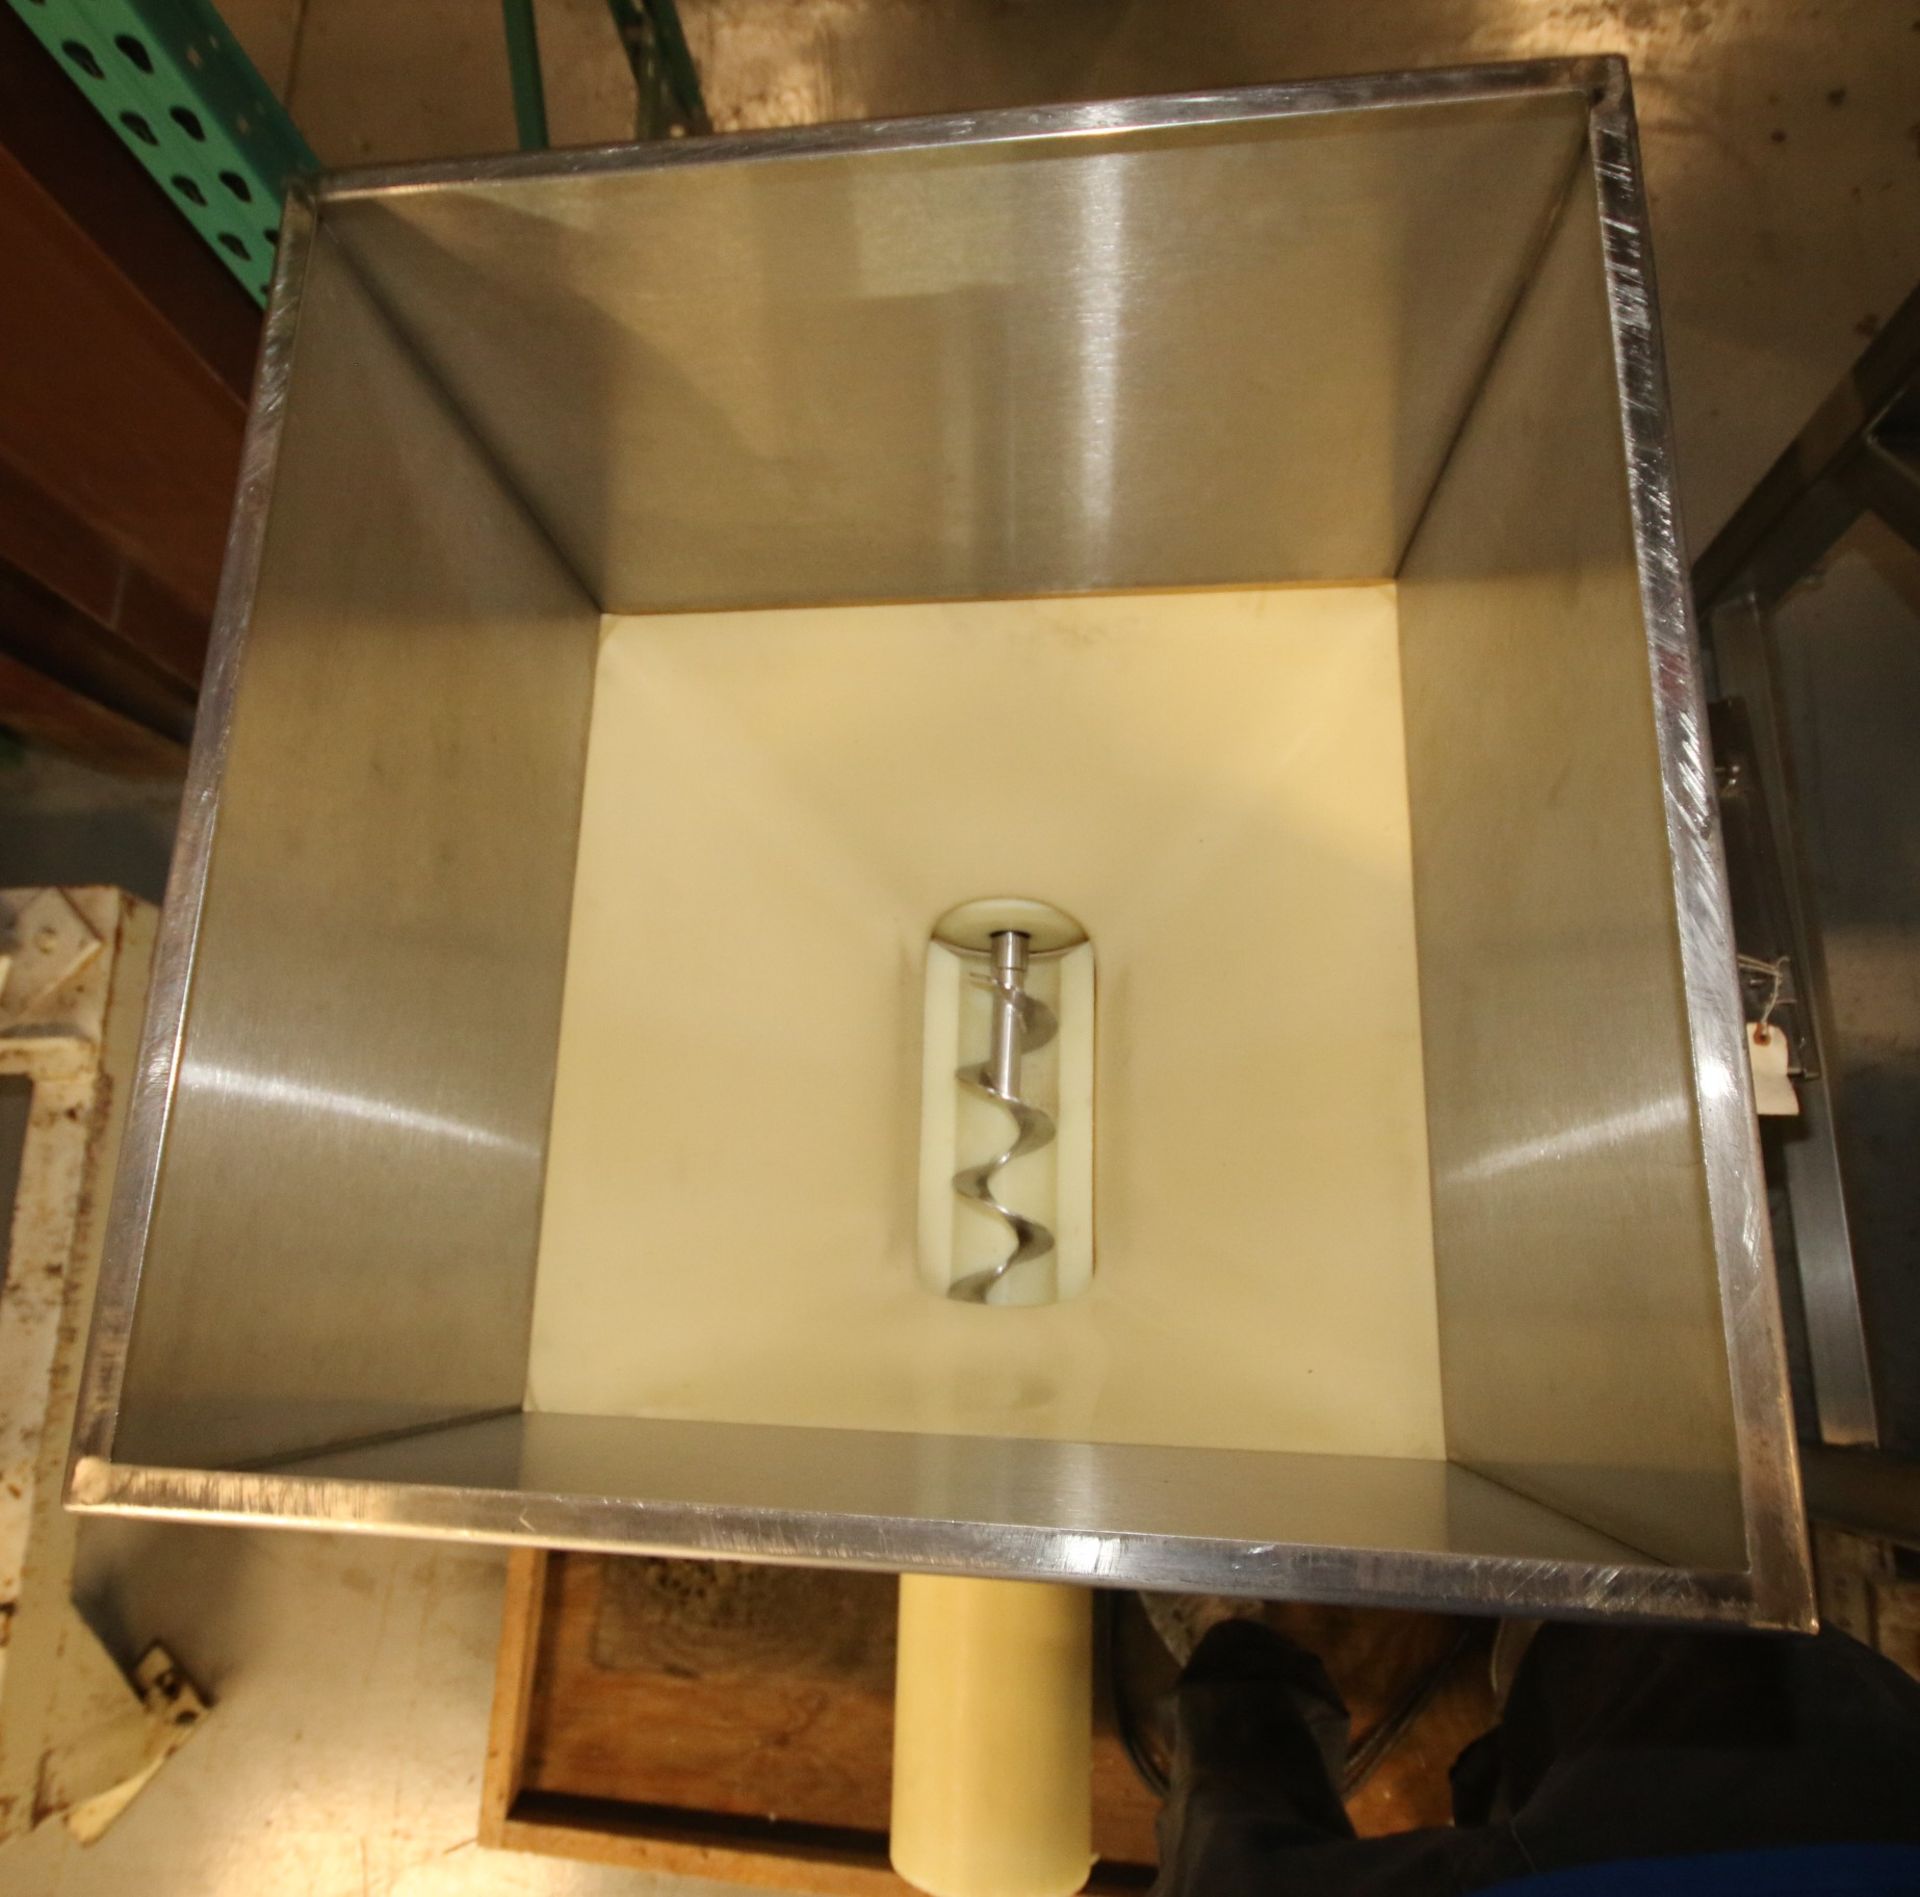 Accu-Rate S/S Dry Material Feeder, S/N 1204-88-0189, with 22" W x 22" W x 34" D Hopper with Lid, - Image 2 of 7